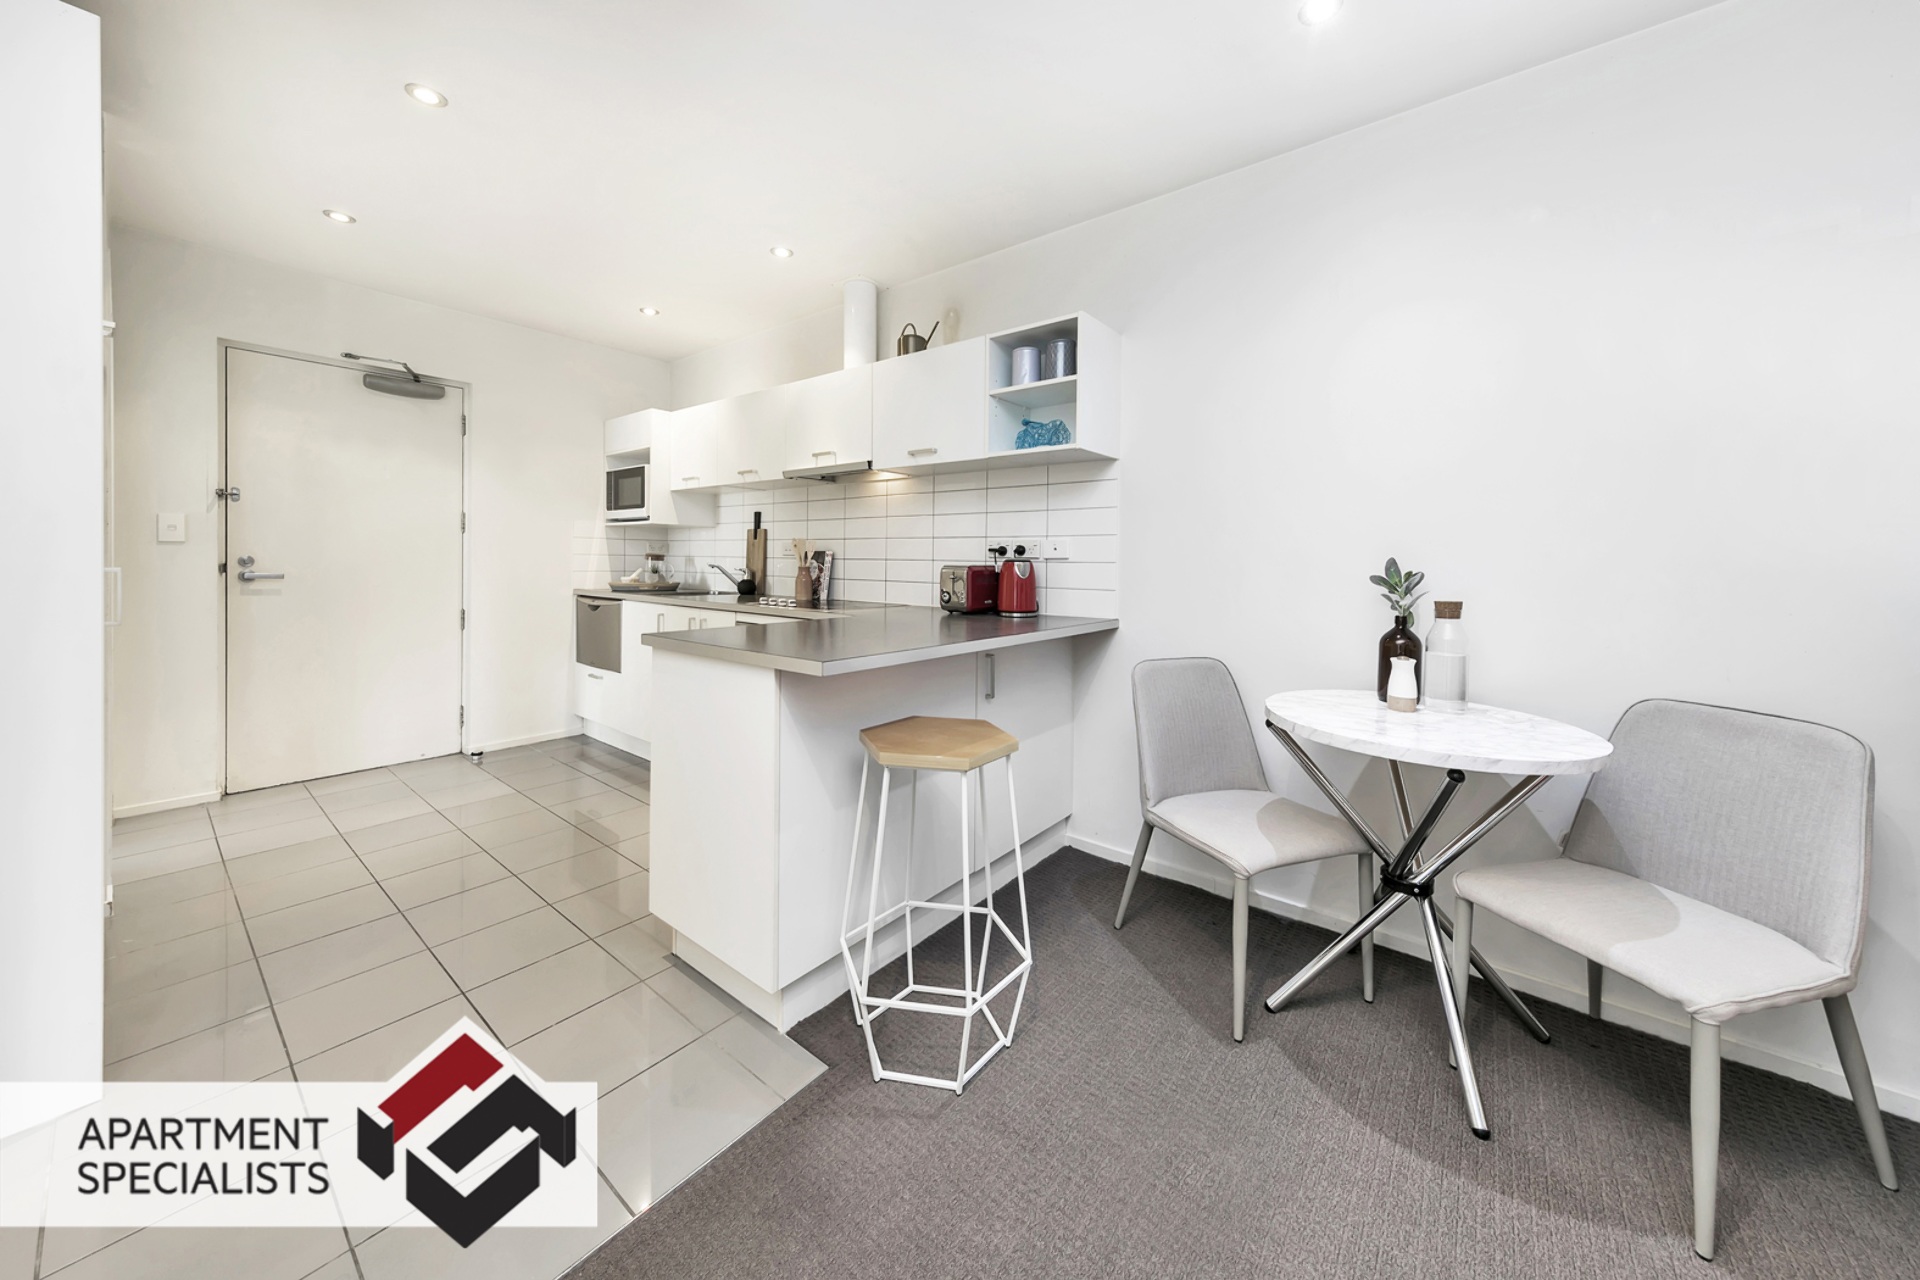 3 | 71 Spencer Road, Albany | Apartment Specialists